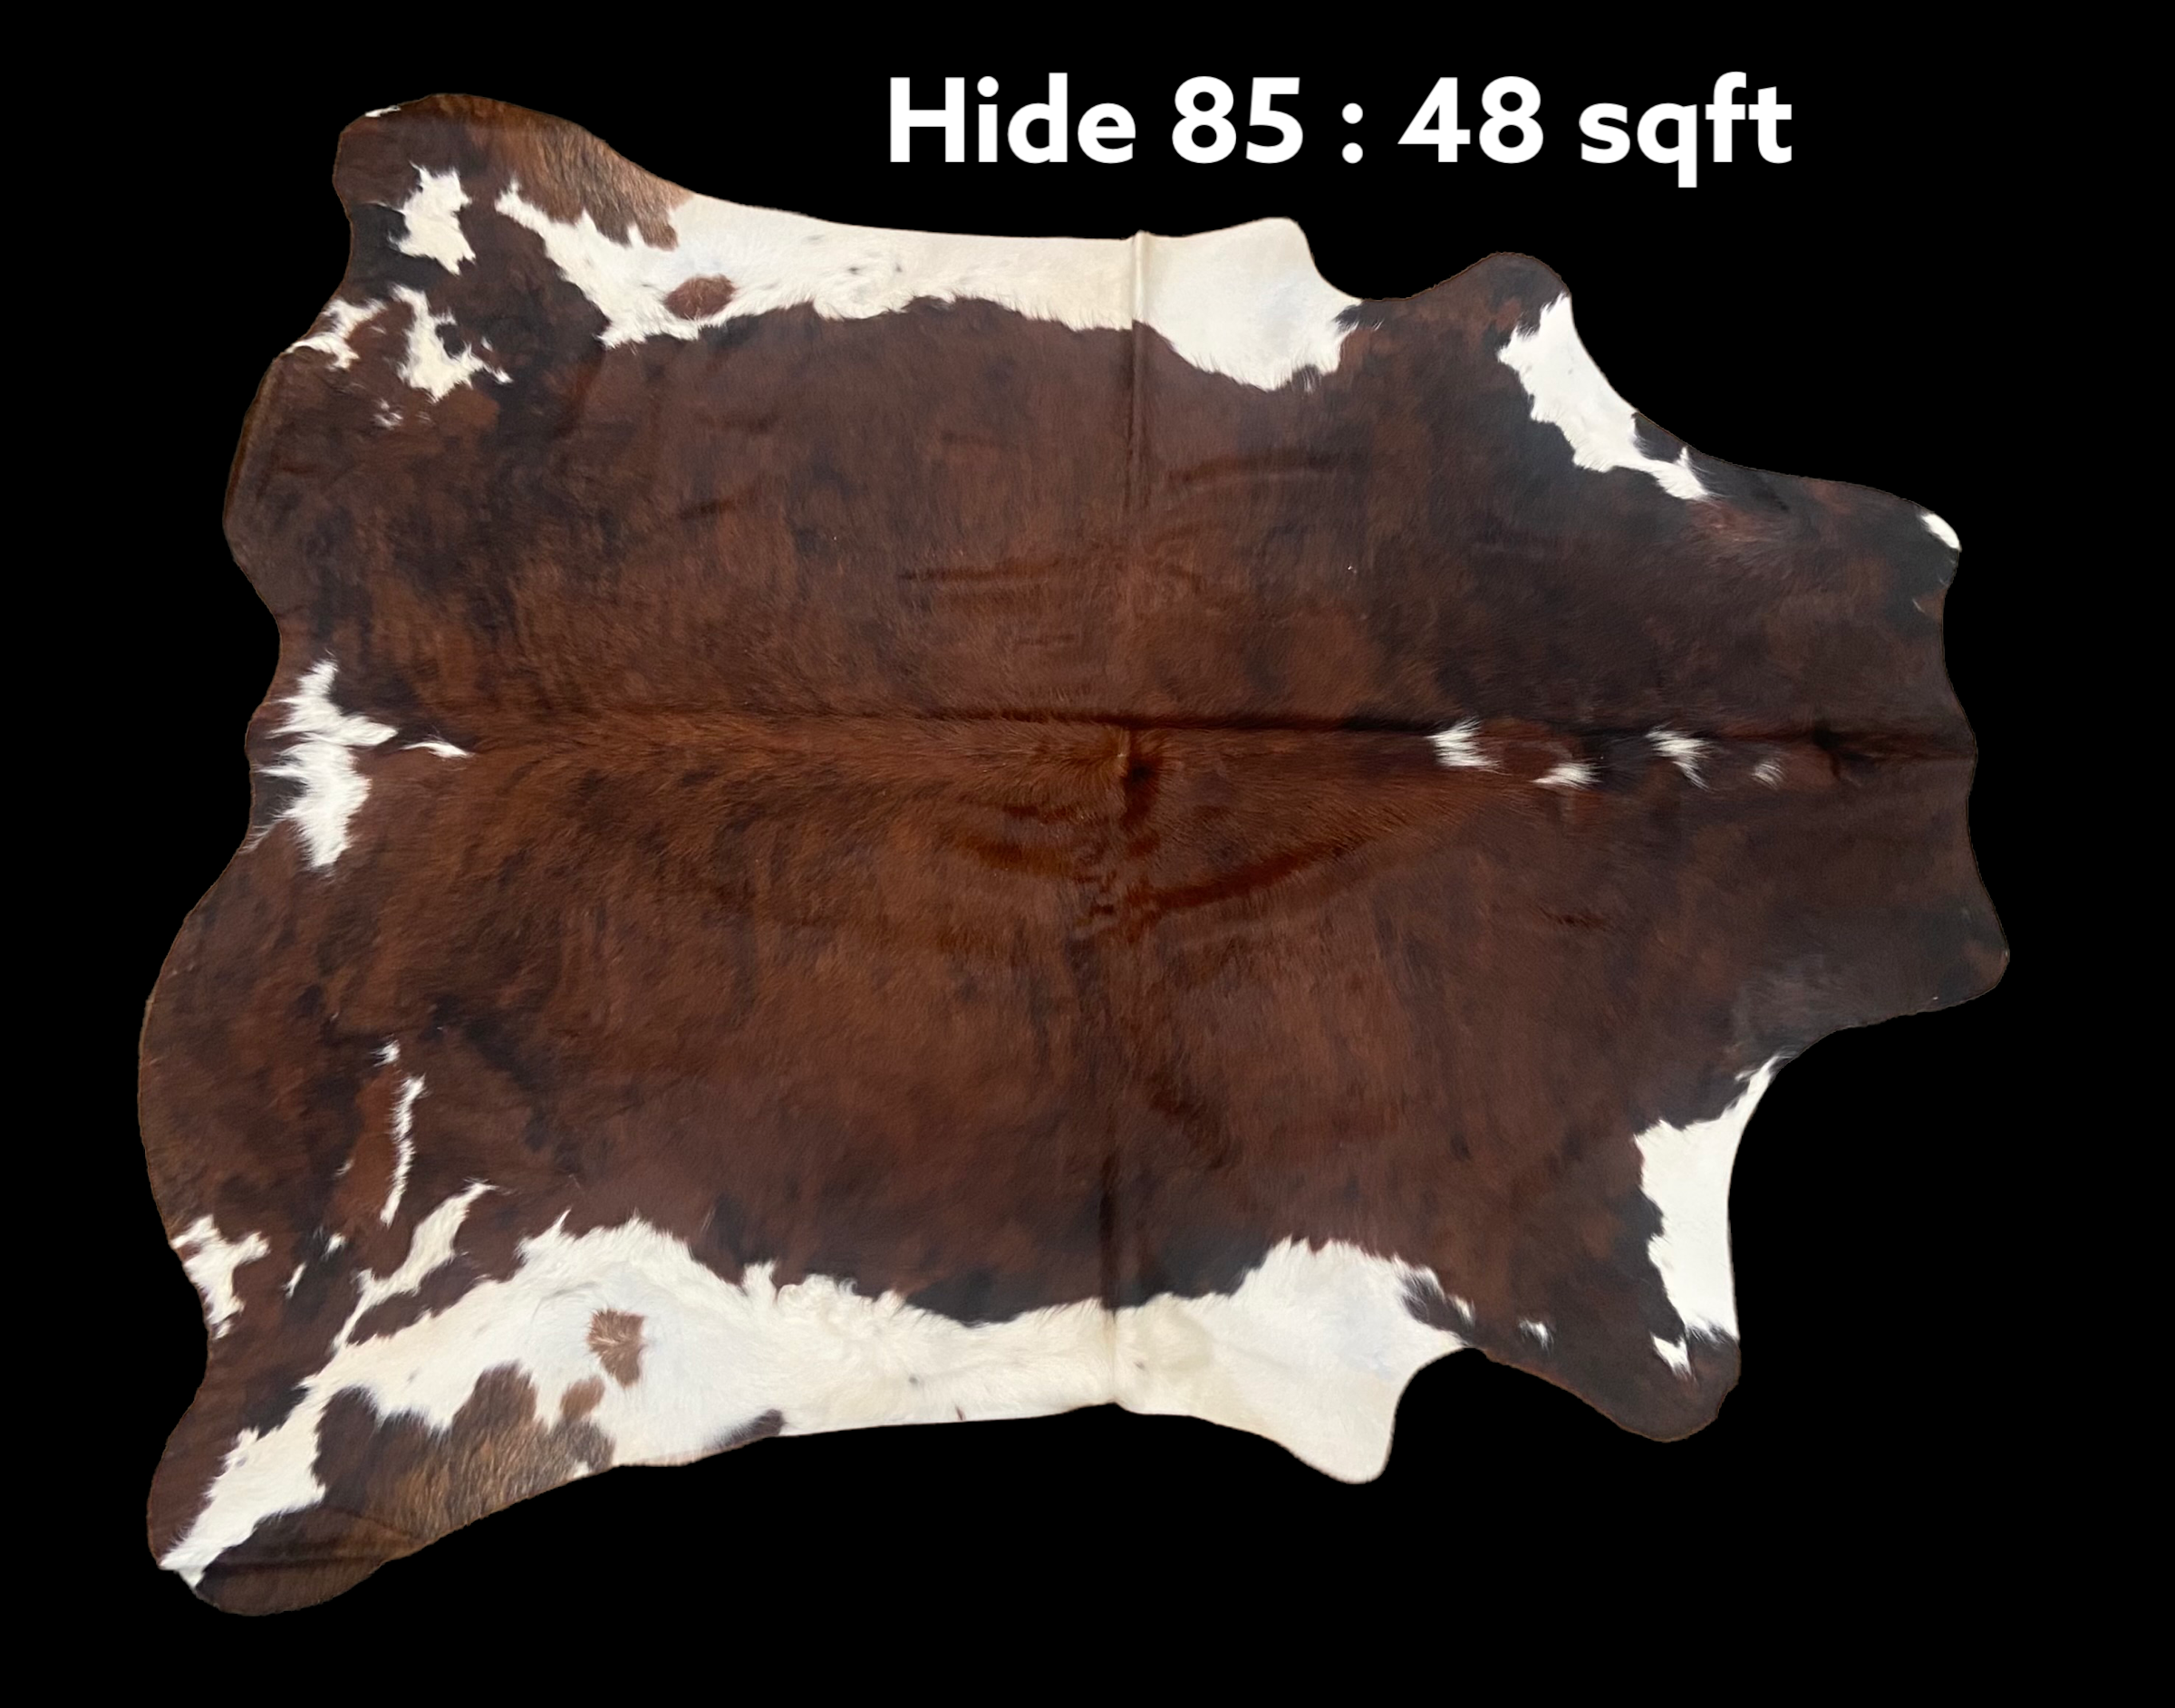 Natural Hair On Cow Hide : This Hide Is Perfect For Wall Hanging, Leather Rugs, Leather Upholstery & Leather Accessories. (Hide85)